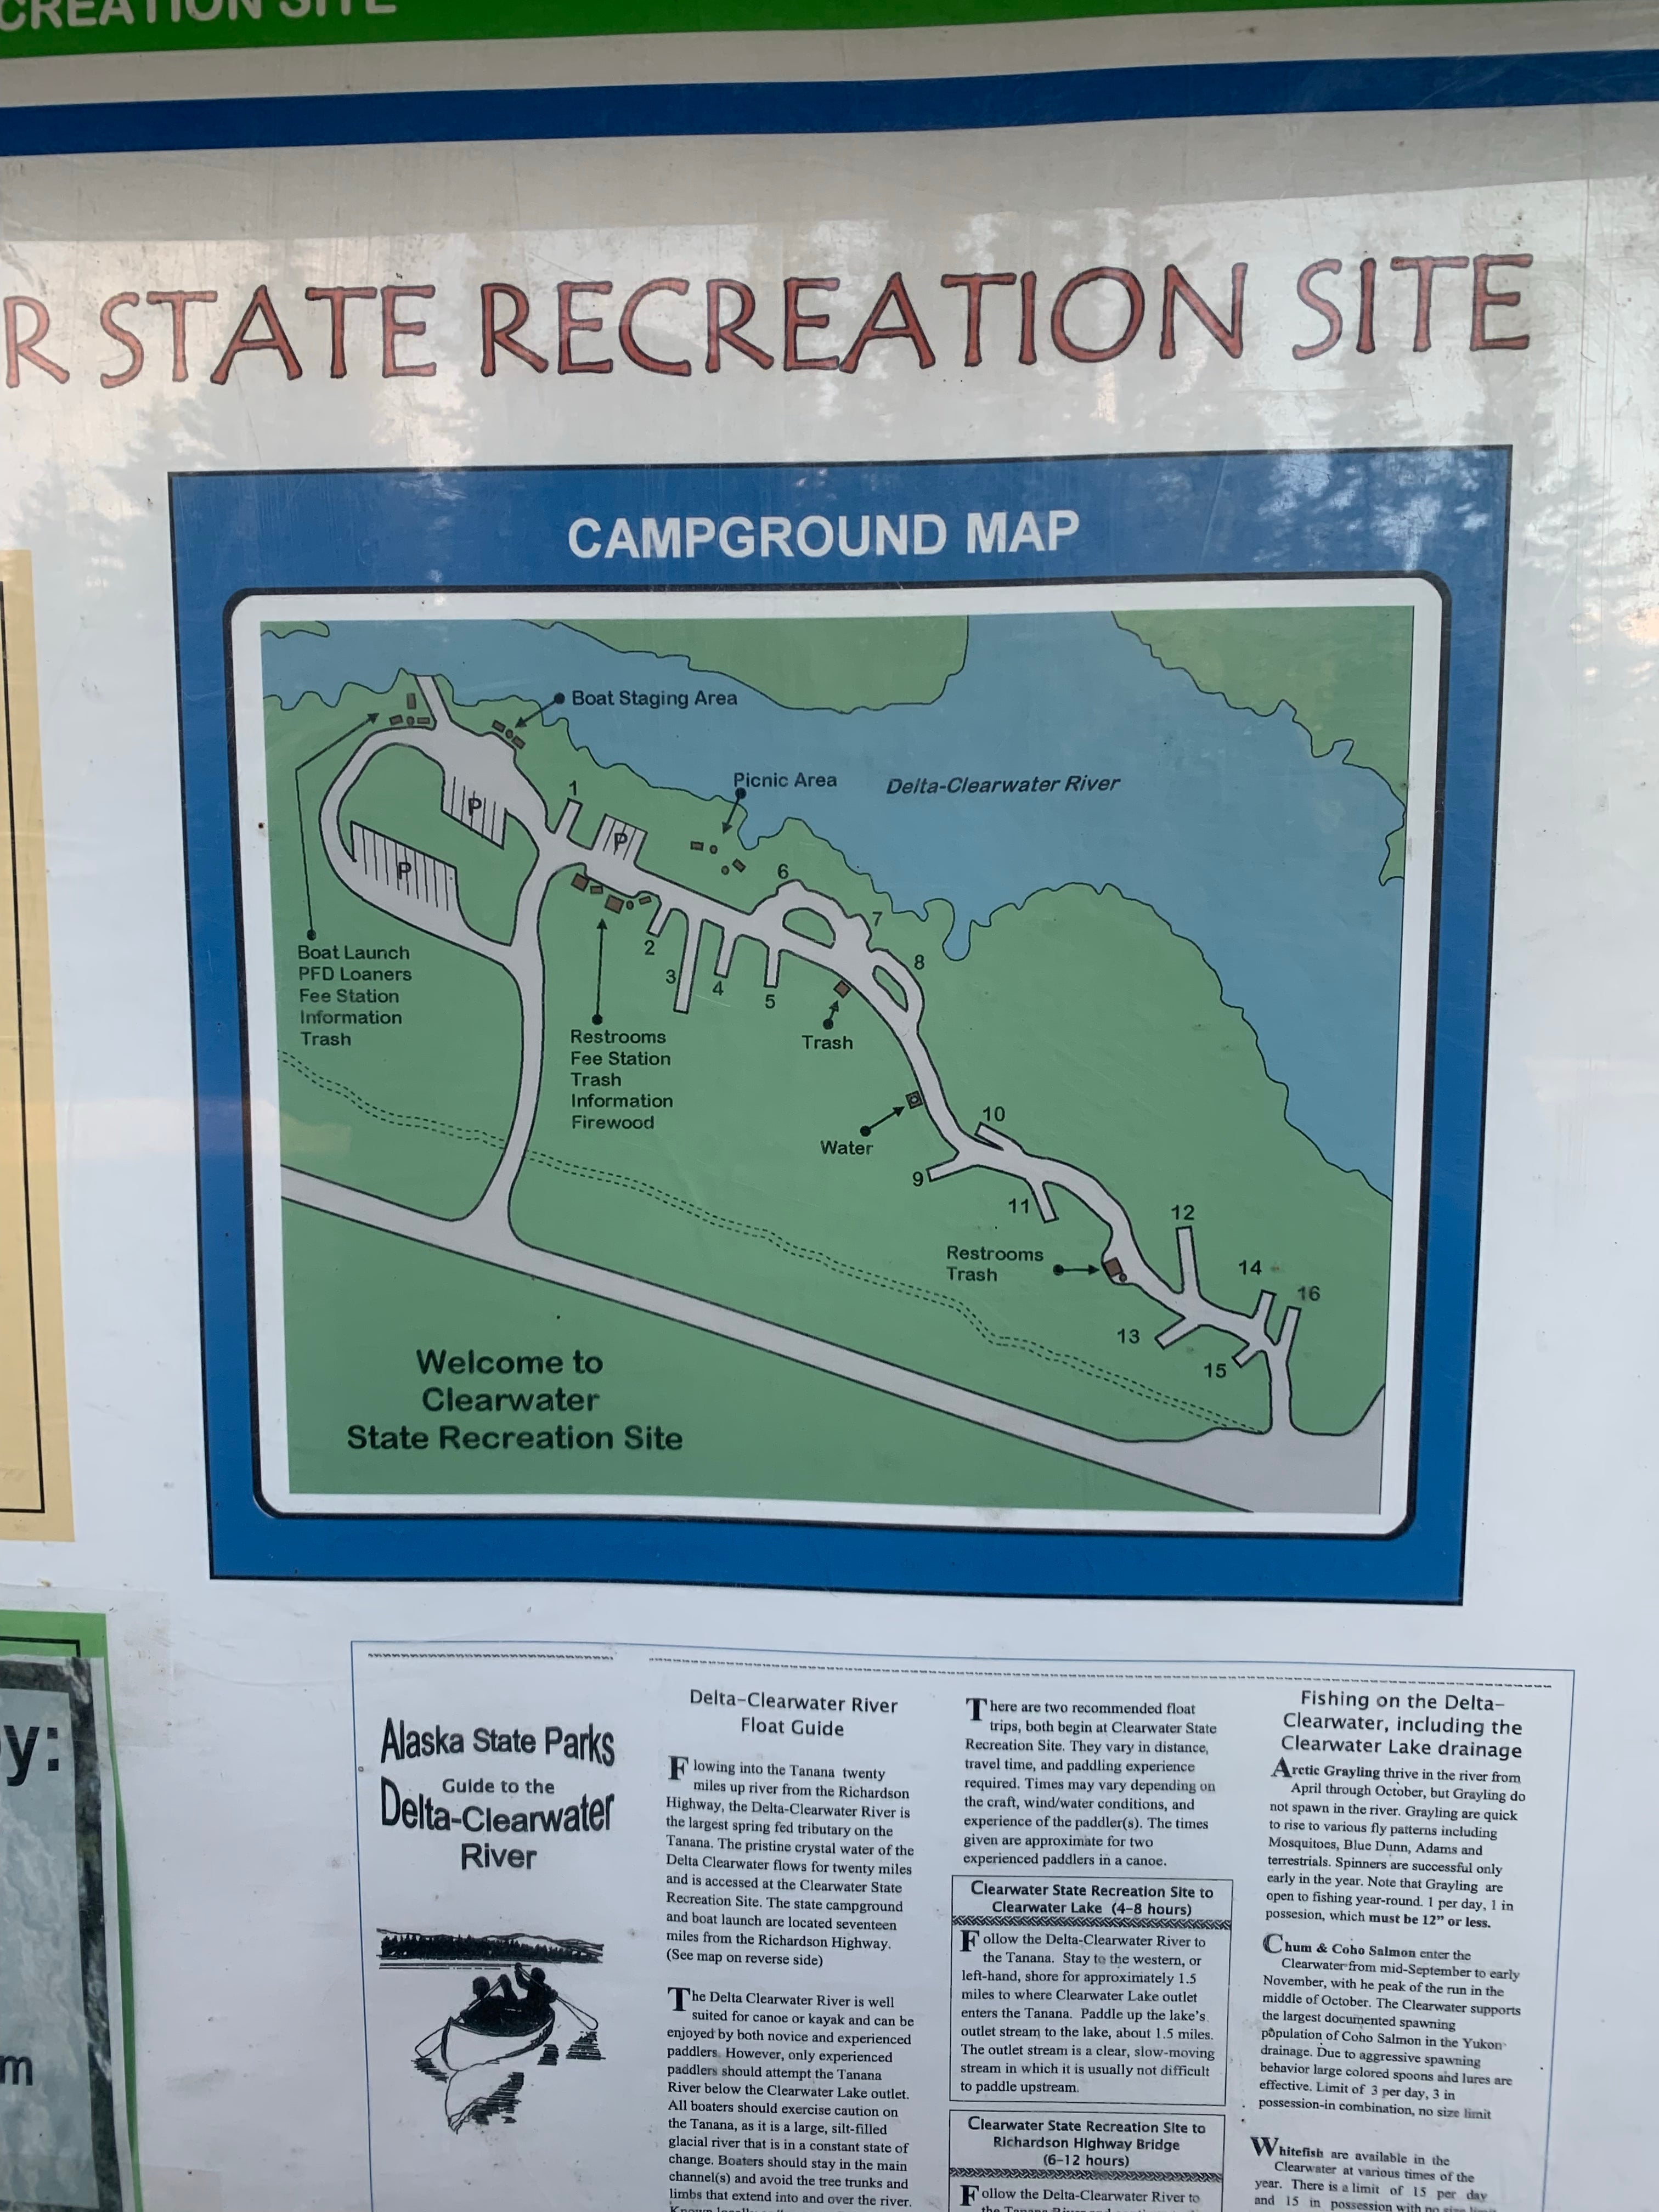 Camper submitted image from Clearwater State Recreation Site - 1